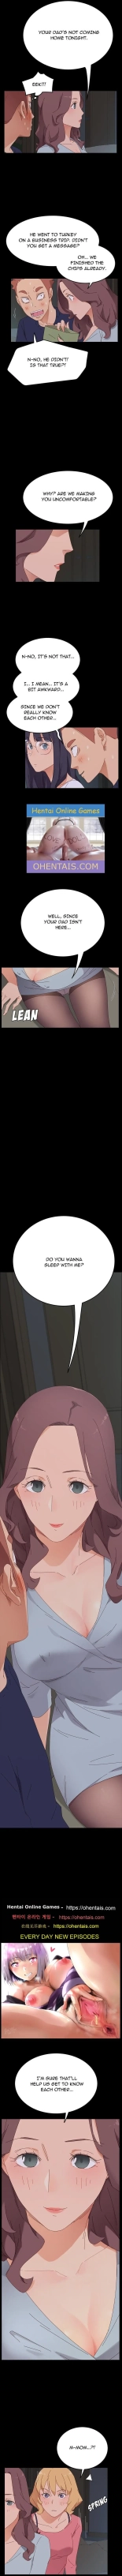 PERFECT ROOMMATES Ch. 1 : page 11